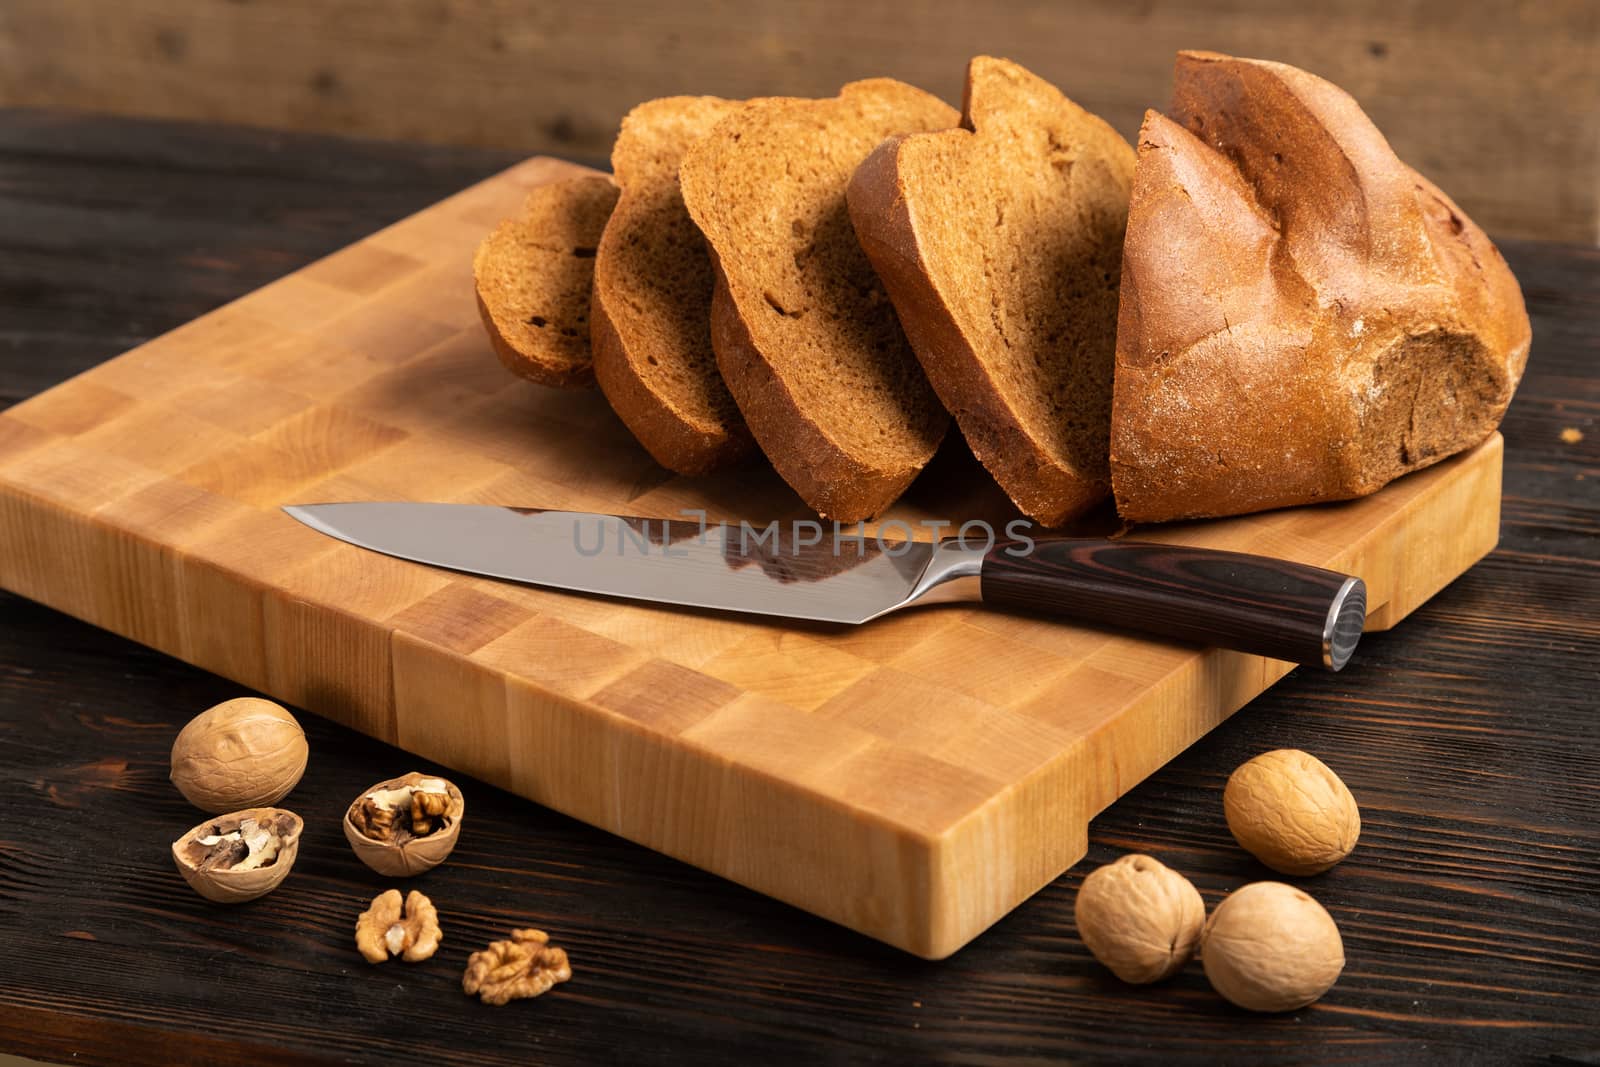 A loaf of bread sliced into slices with a knife on a wooden cutting board